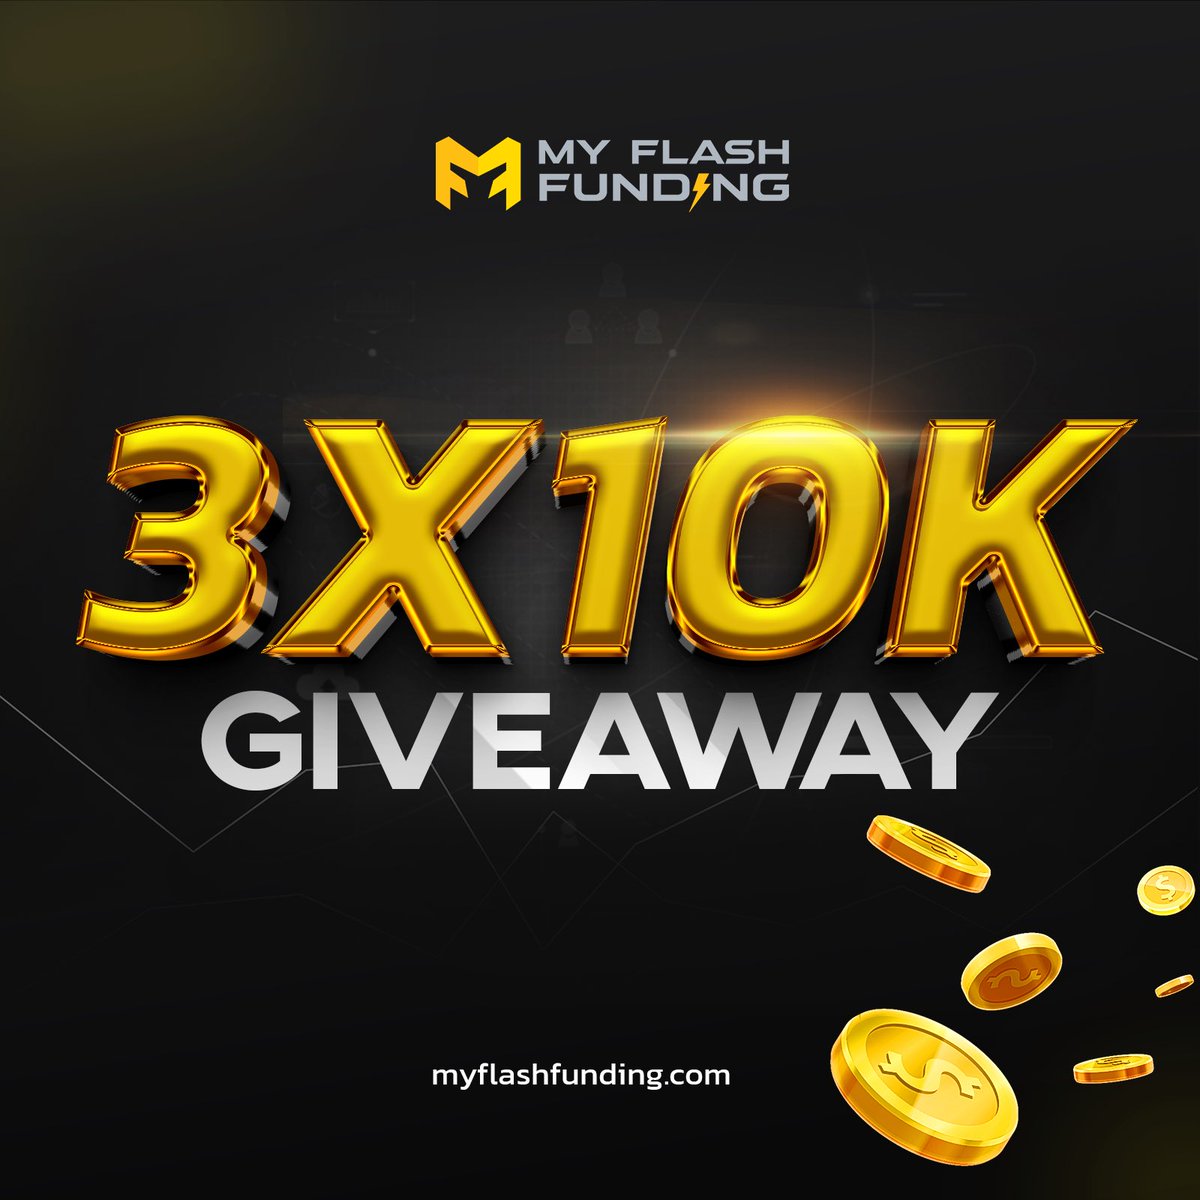 $10 X 3 Funded Account Giveaway! 

Make sure to do the following:

Join discord.gg/myflashfunding 
Follow This Account
Like & Repost This Post!

Winners will be selected in the discord below! Tomorrow at UTC+2
discord.gg/fulcrumfx

#myflashfunding #Daytrader #giveaway